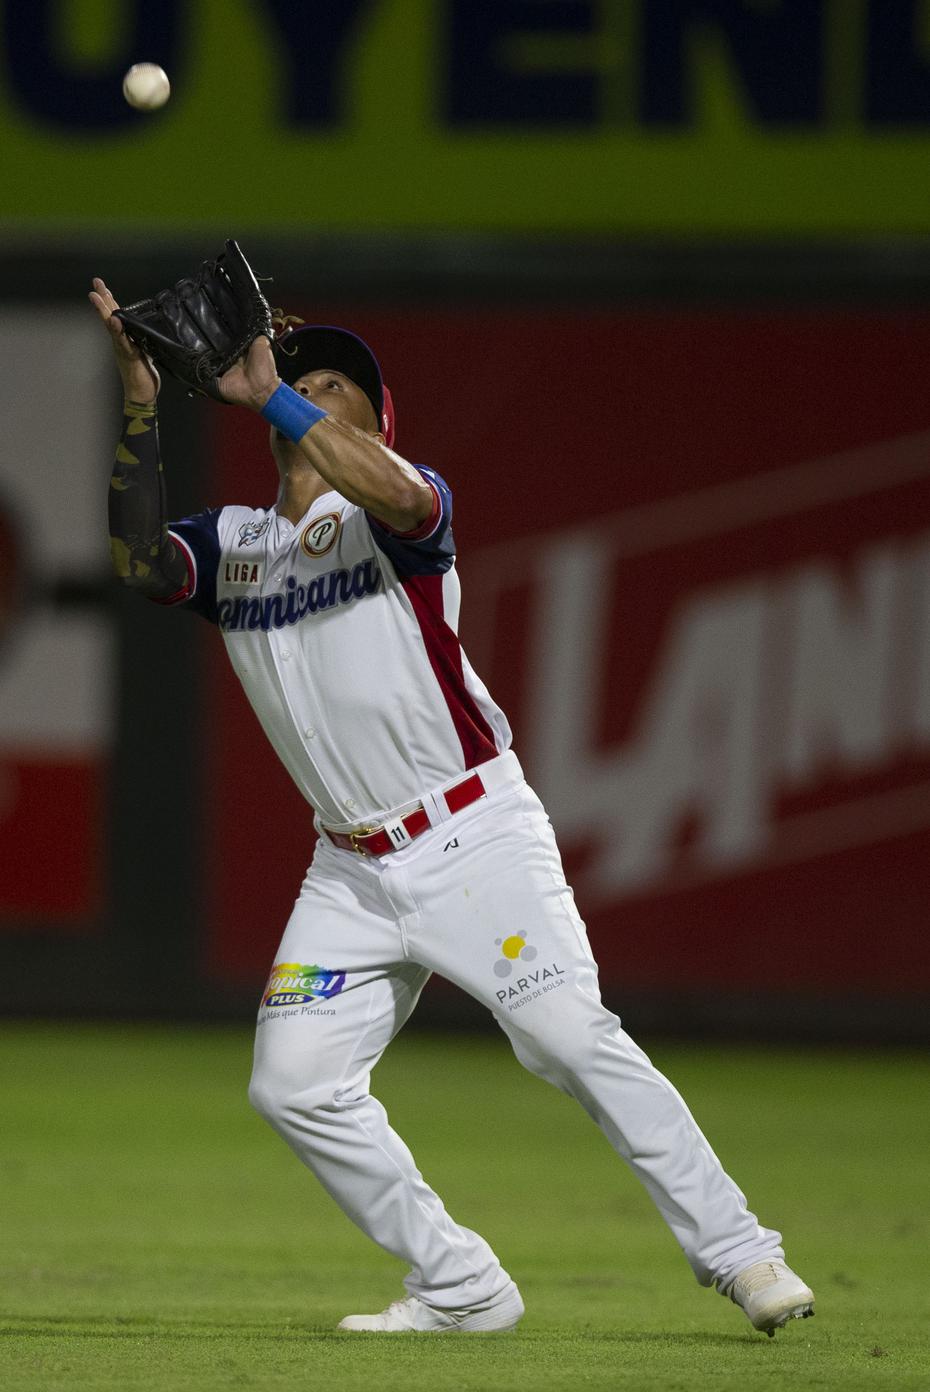 The Dominican Republic has won five consecutive games against Puerto Ricans in the Caribbean since 2019.  In the photo, Moises Sierra.